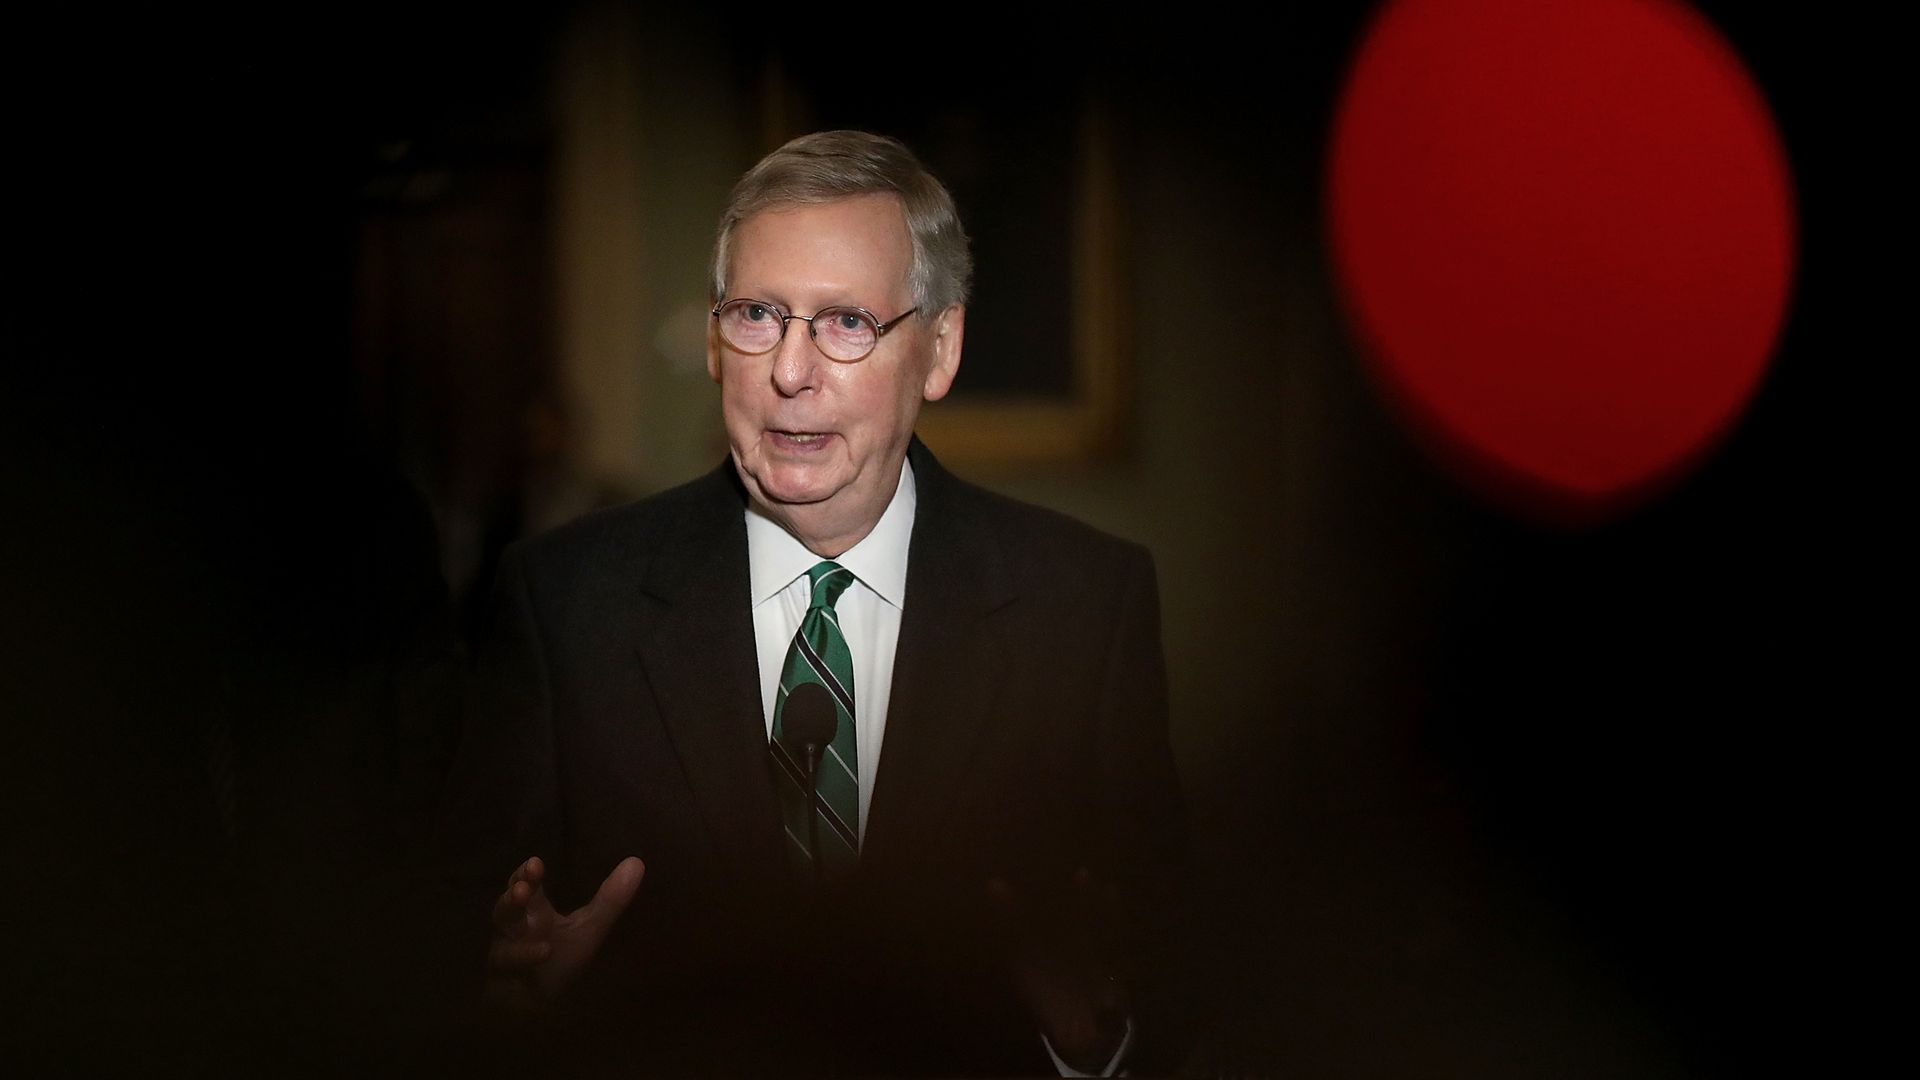 Mitch McConnell stand in a spotlight surrounded by darkness